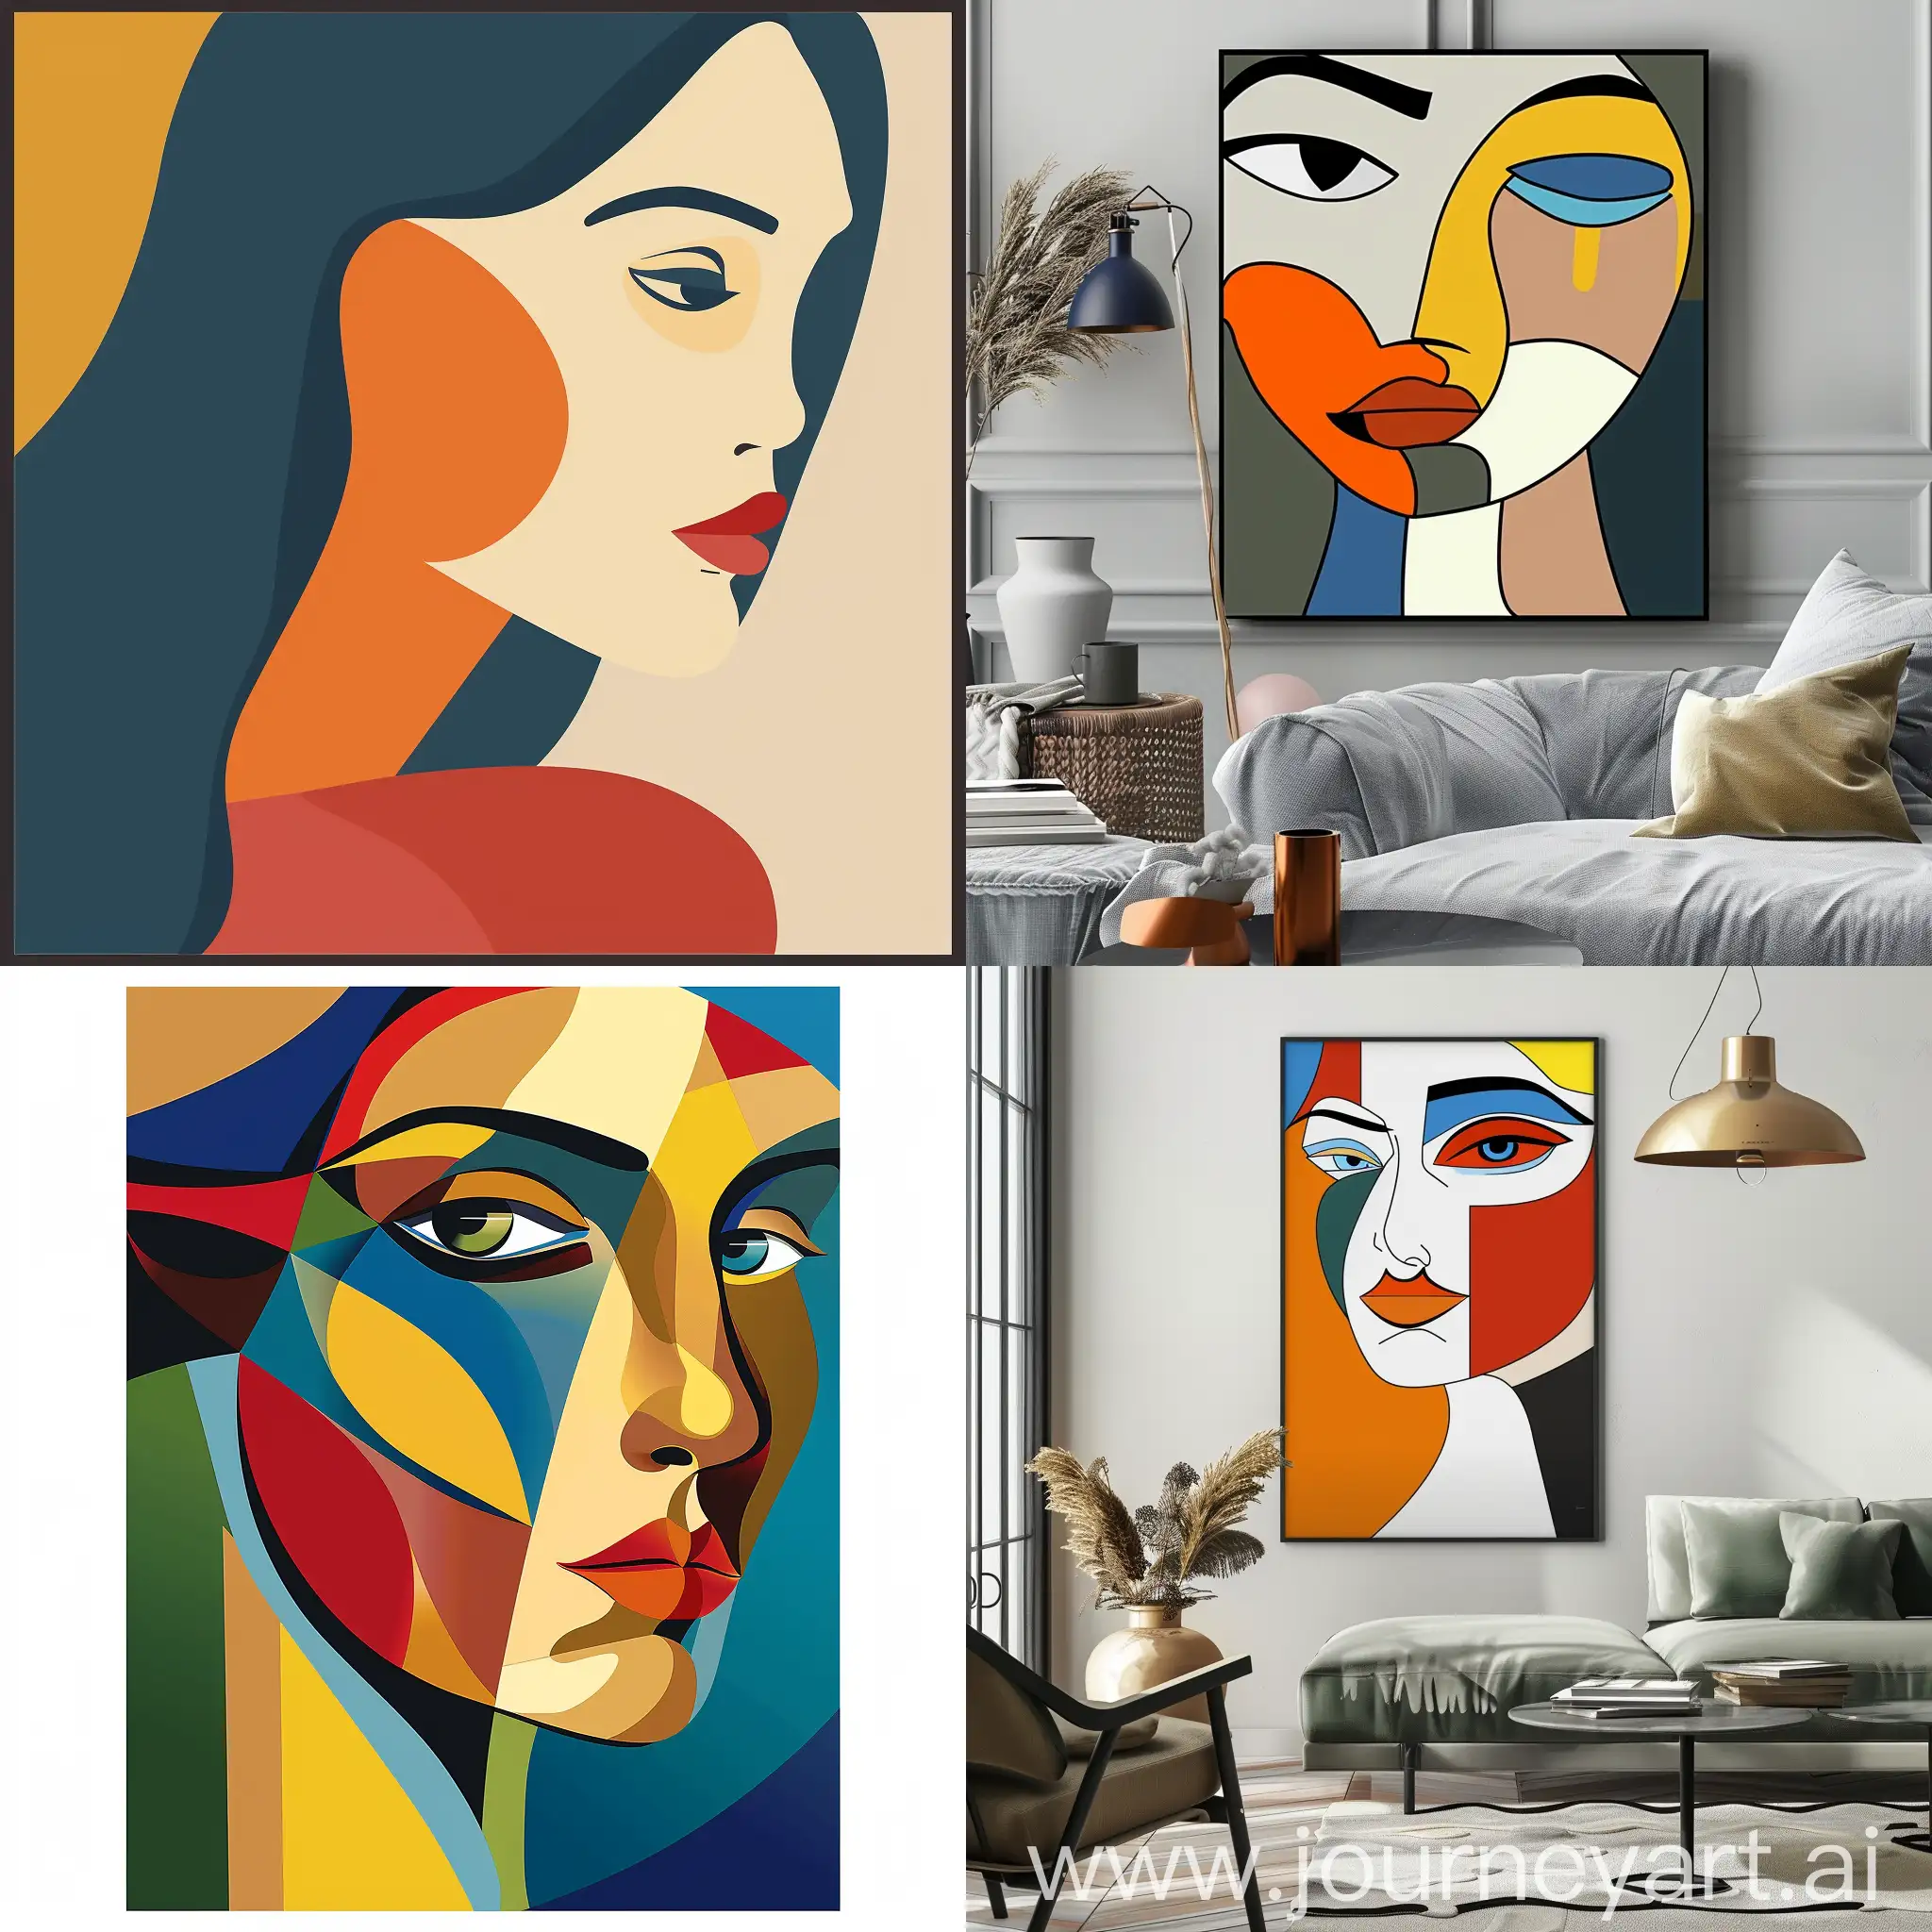 Abstract-Cartoon-Female-Portrait-Poster-on-Wall-by-Alexander-Archipenko-and-Keith-Negley